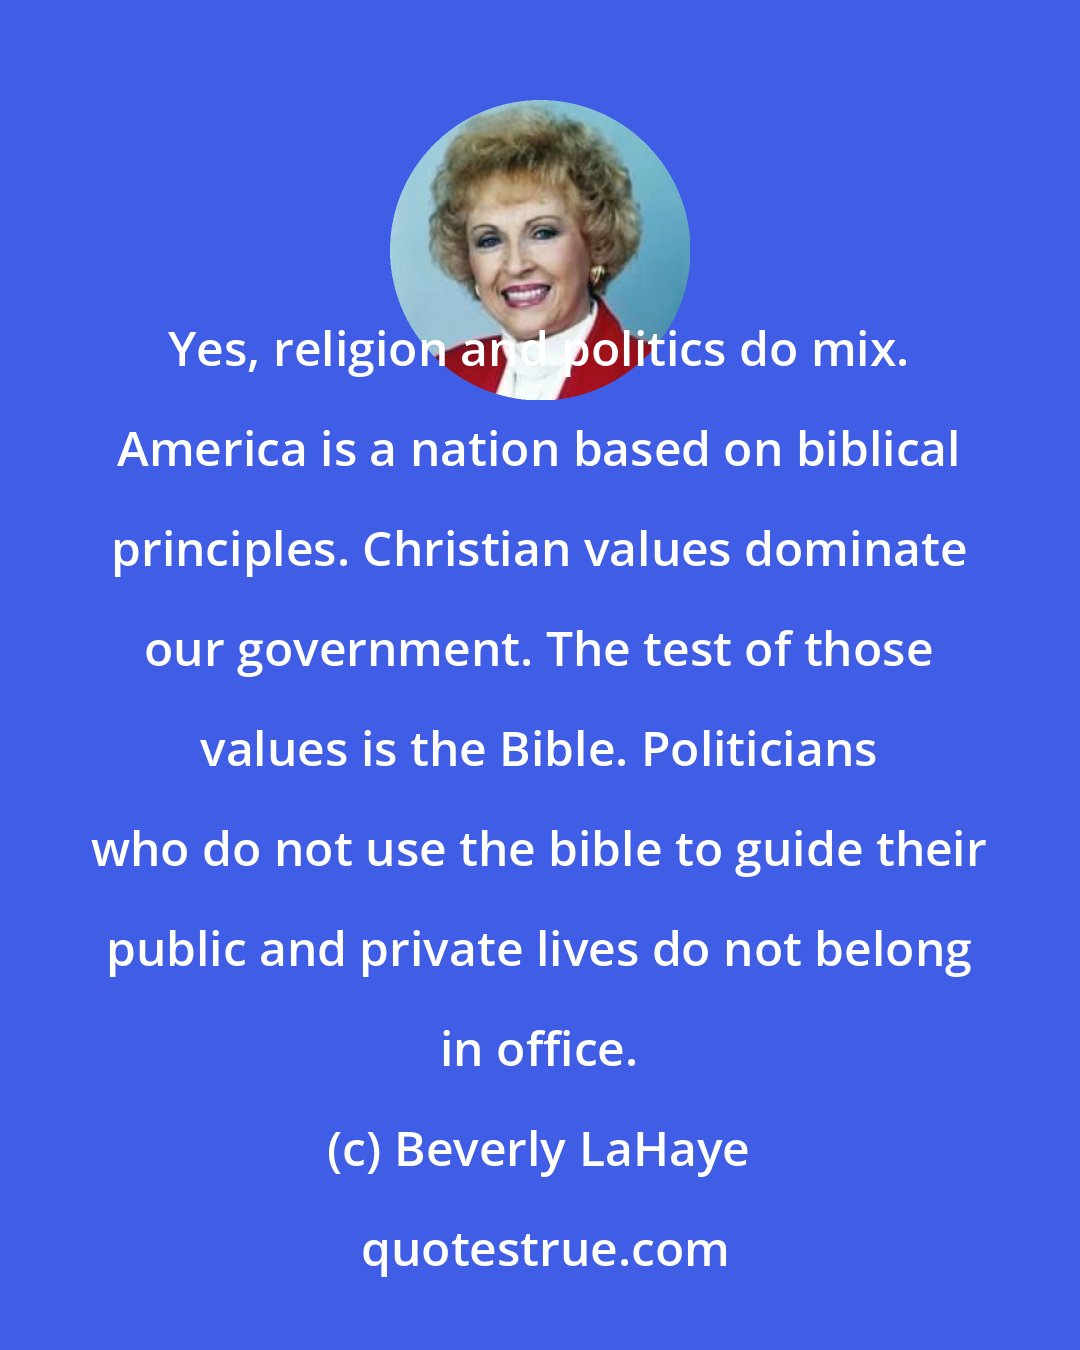 Beverly LaHaye: Yes, religion and politics do mix. America is a nation based on biblical principles. Christian values dominate our government. The test of those values is the Bible. Politicians who do not use the bible to guide their public and private lives do not belong in office.